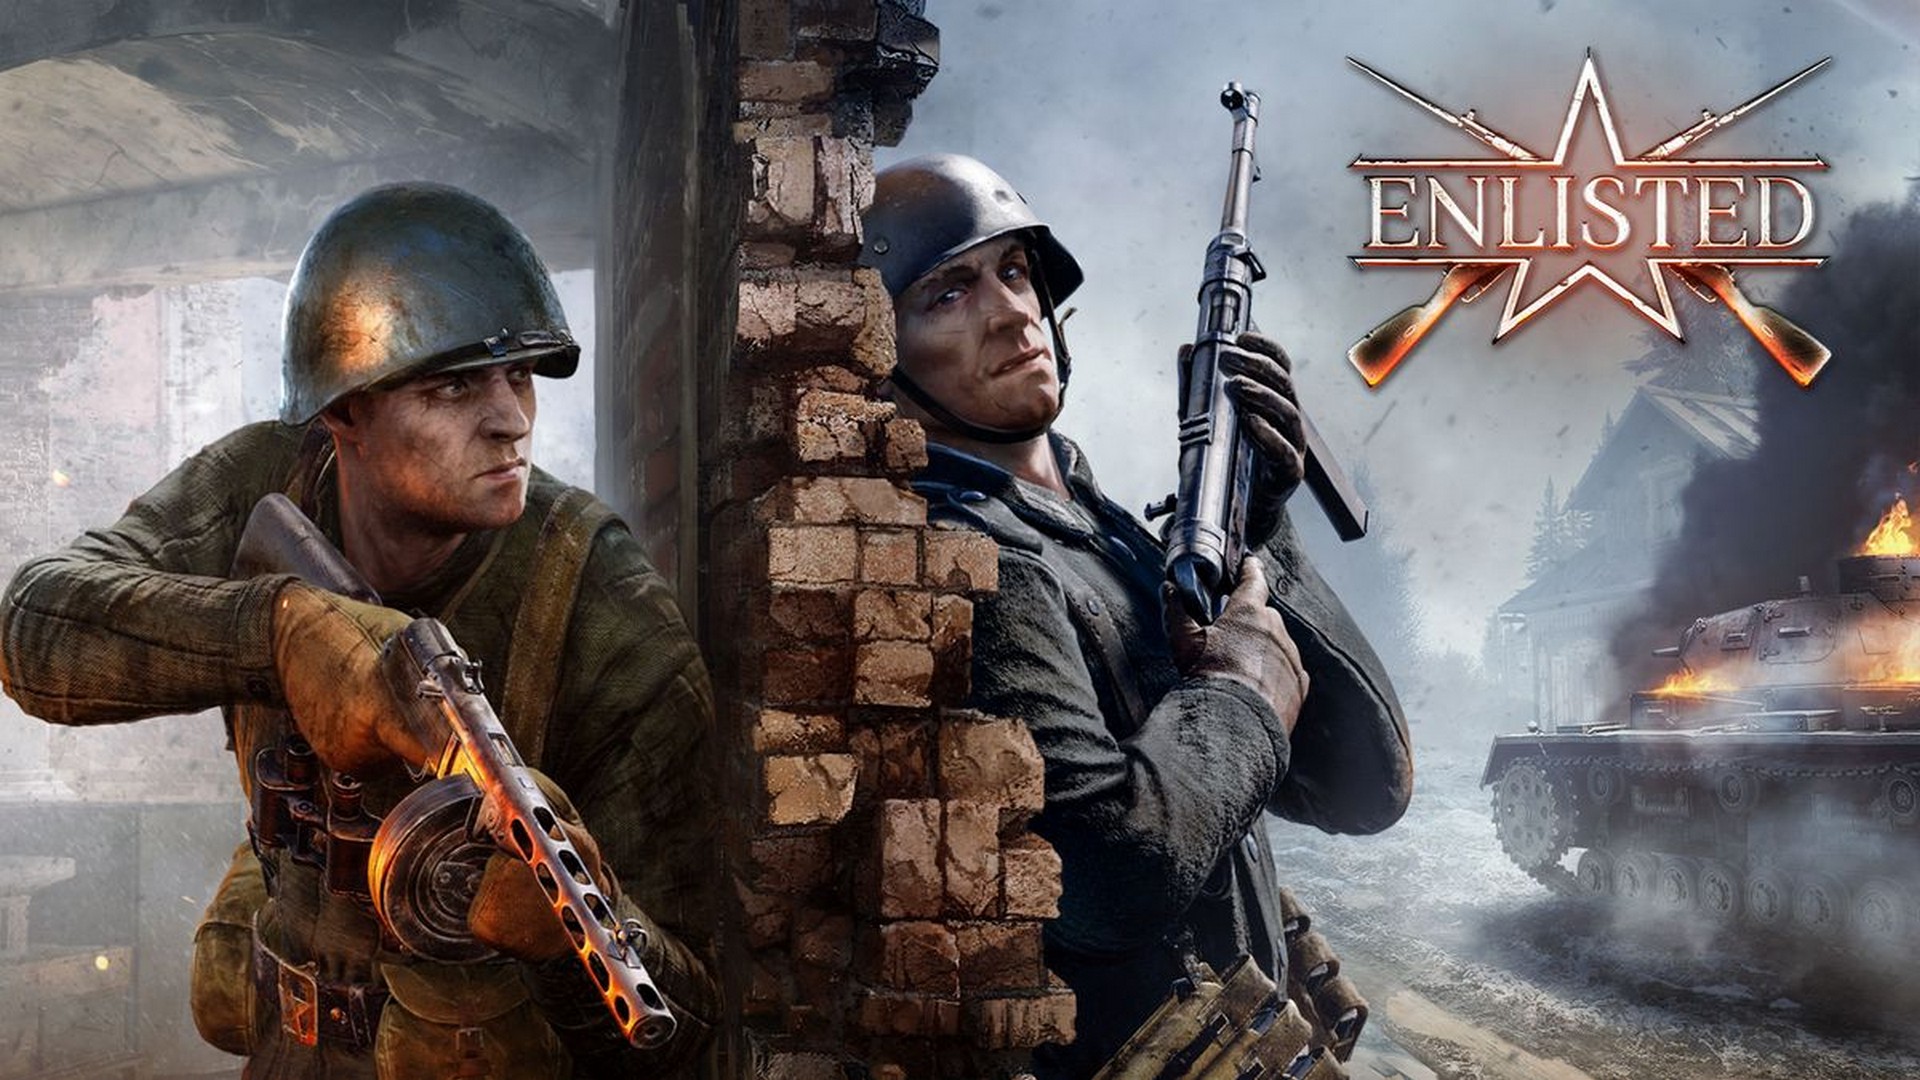 Battle of Berlin Closed Beta Testing Now Available For Enlisted